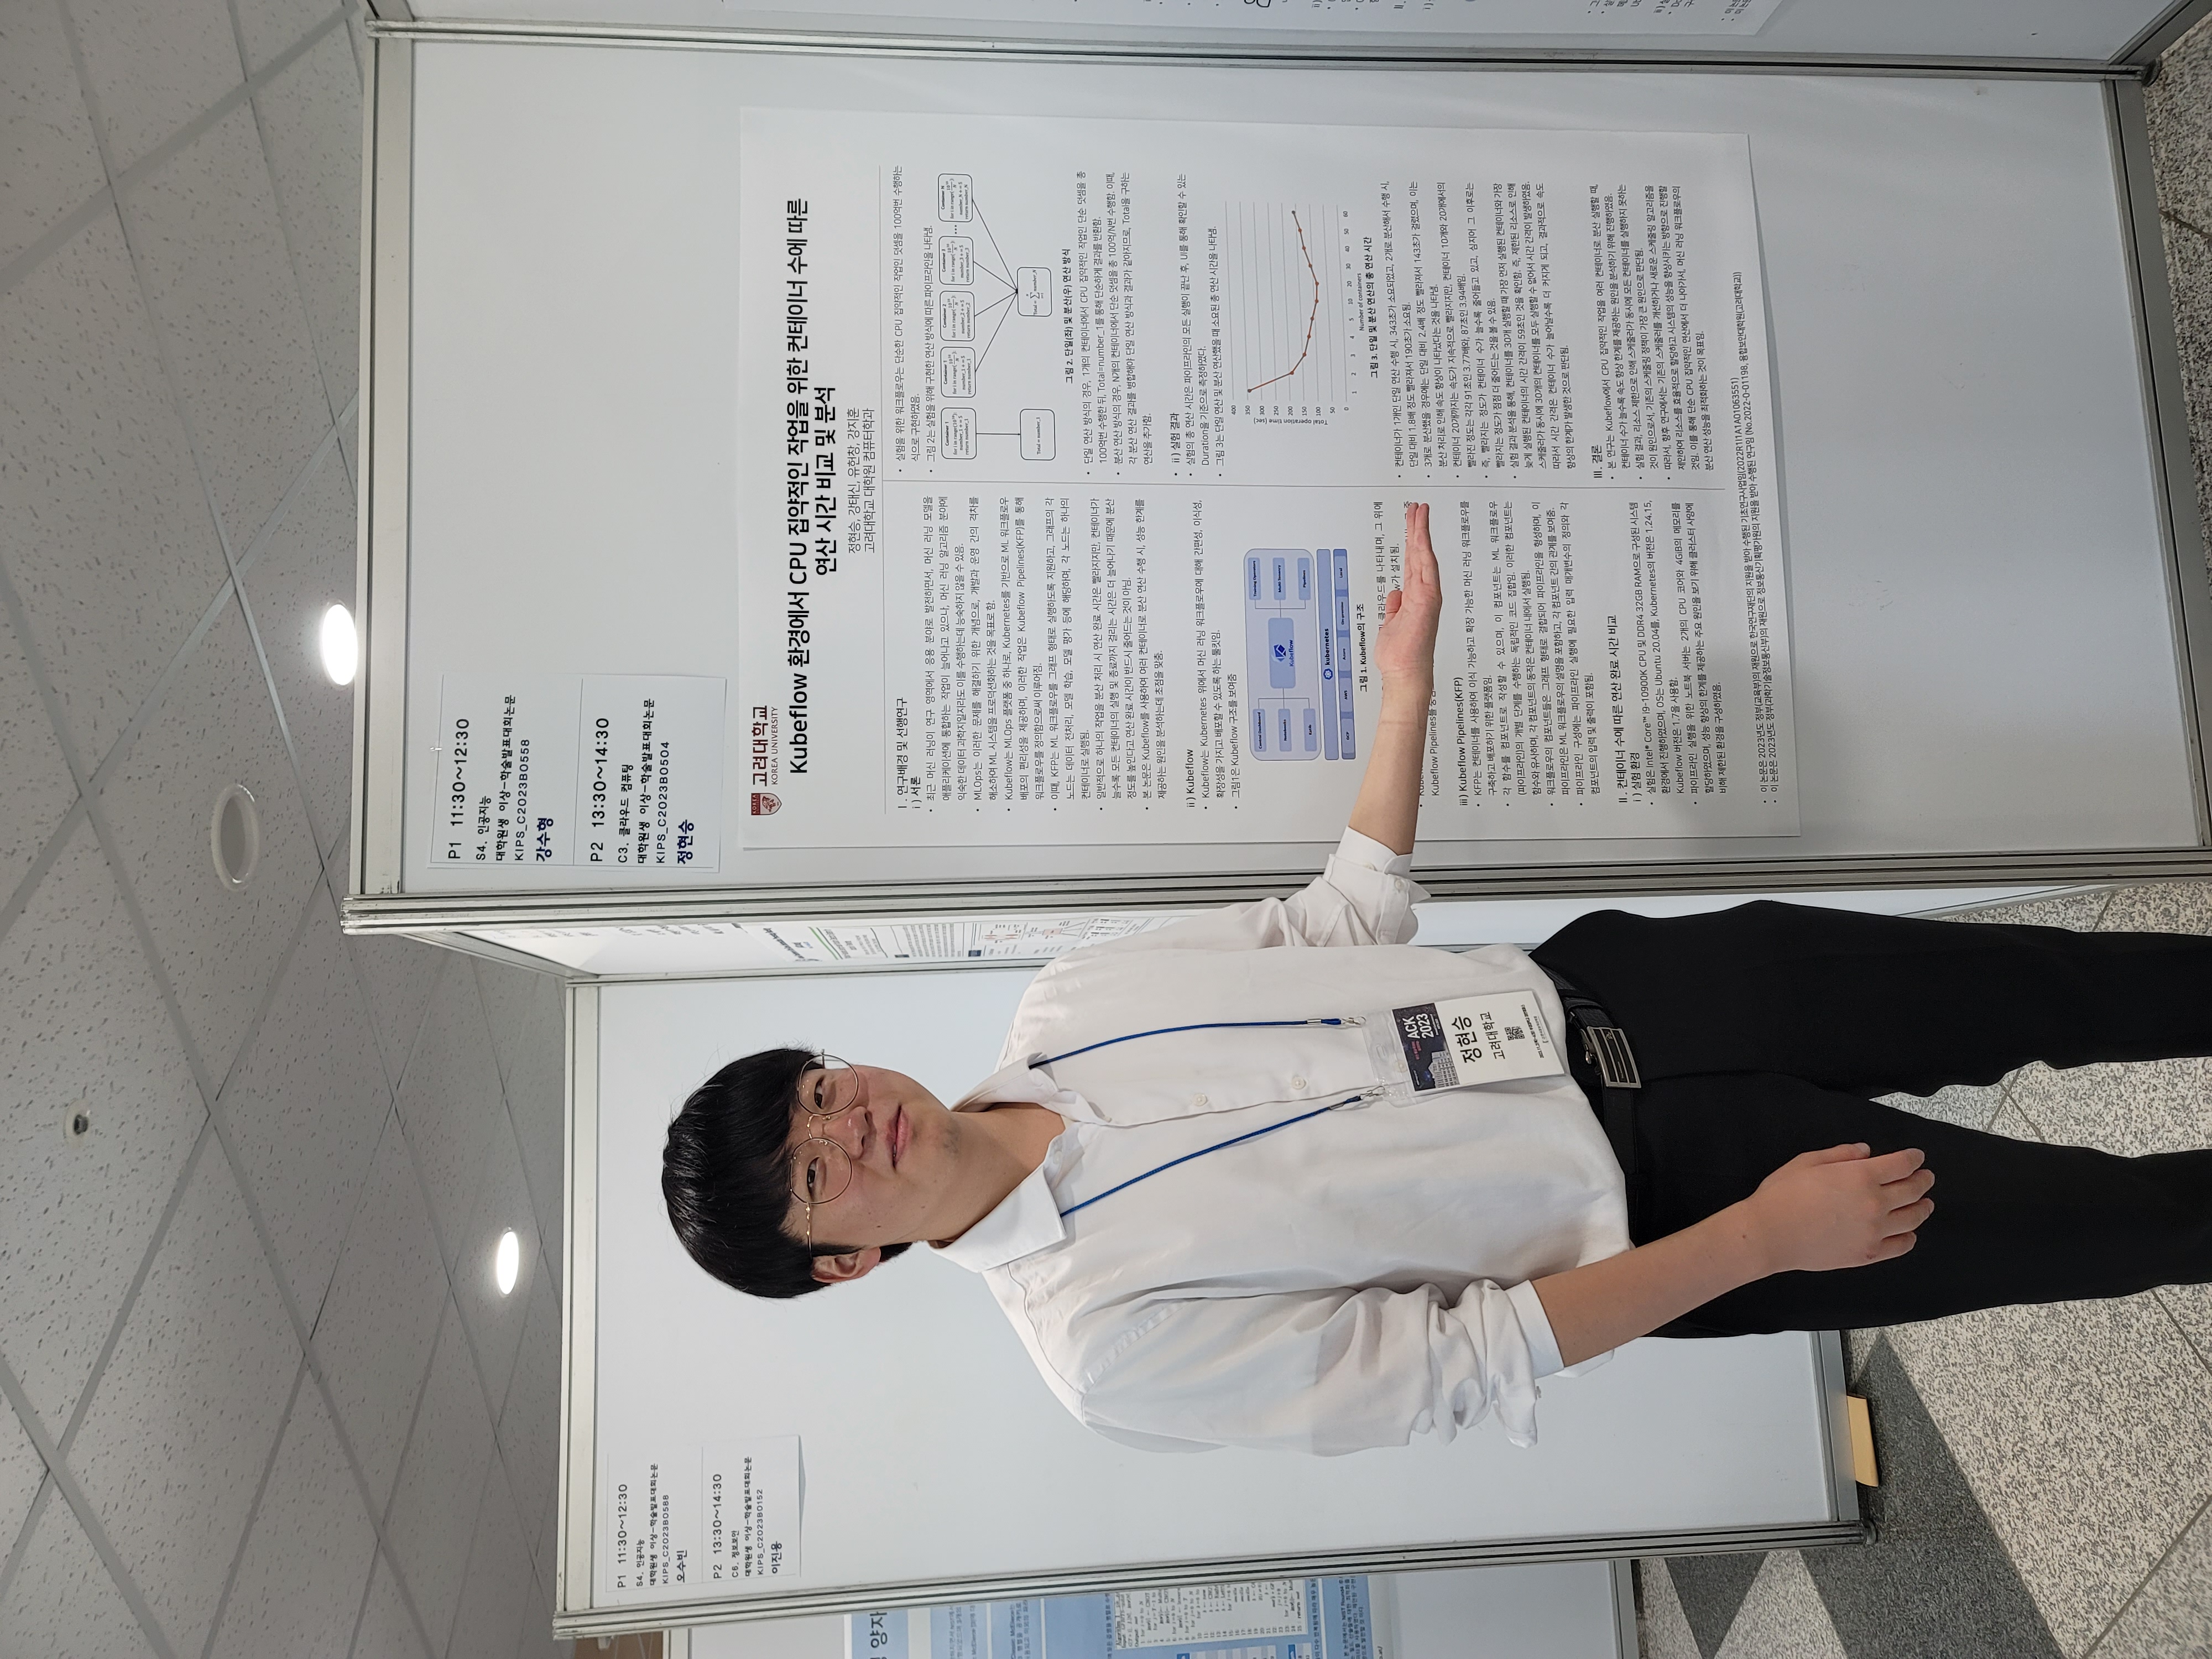 Hyunseung Jung (M.S. student) is presenting his paper.